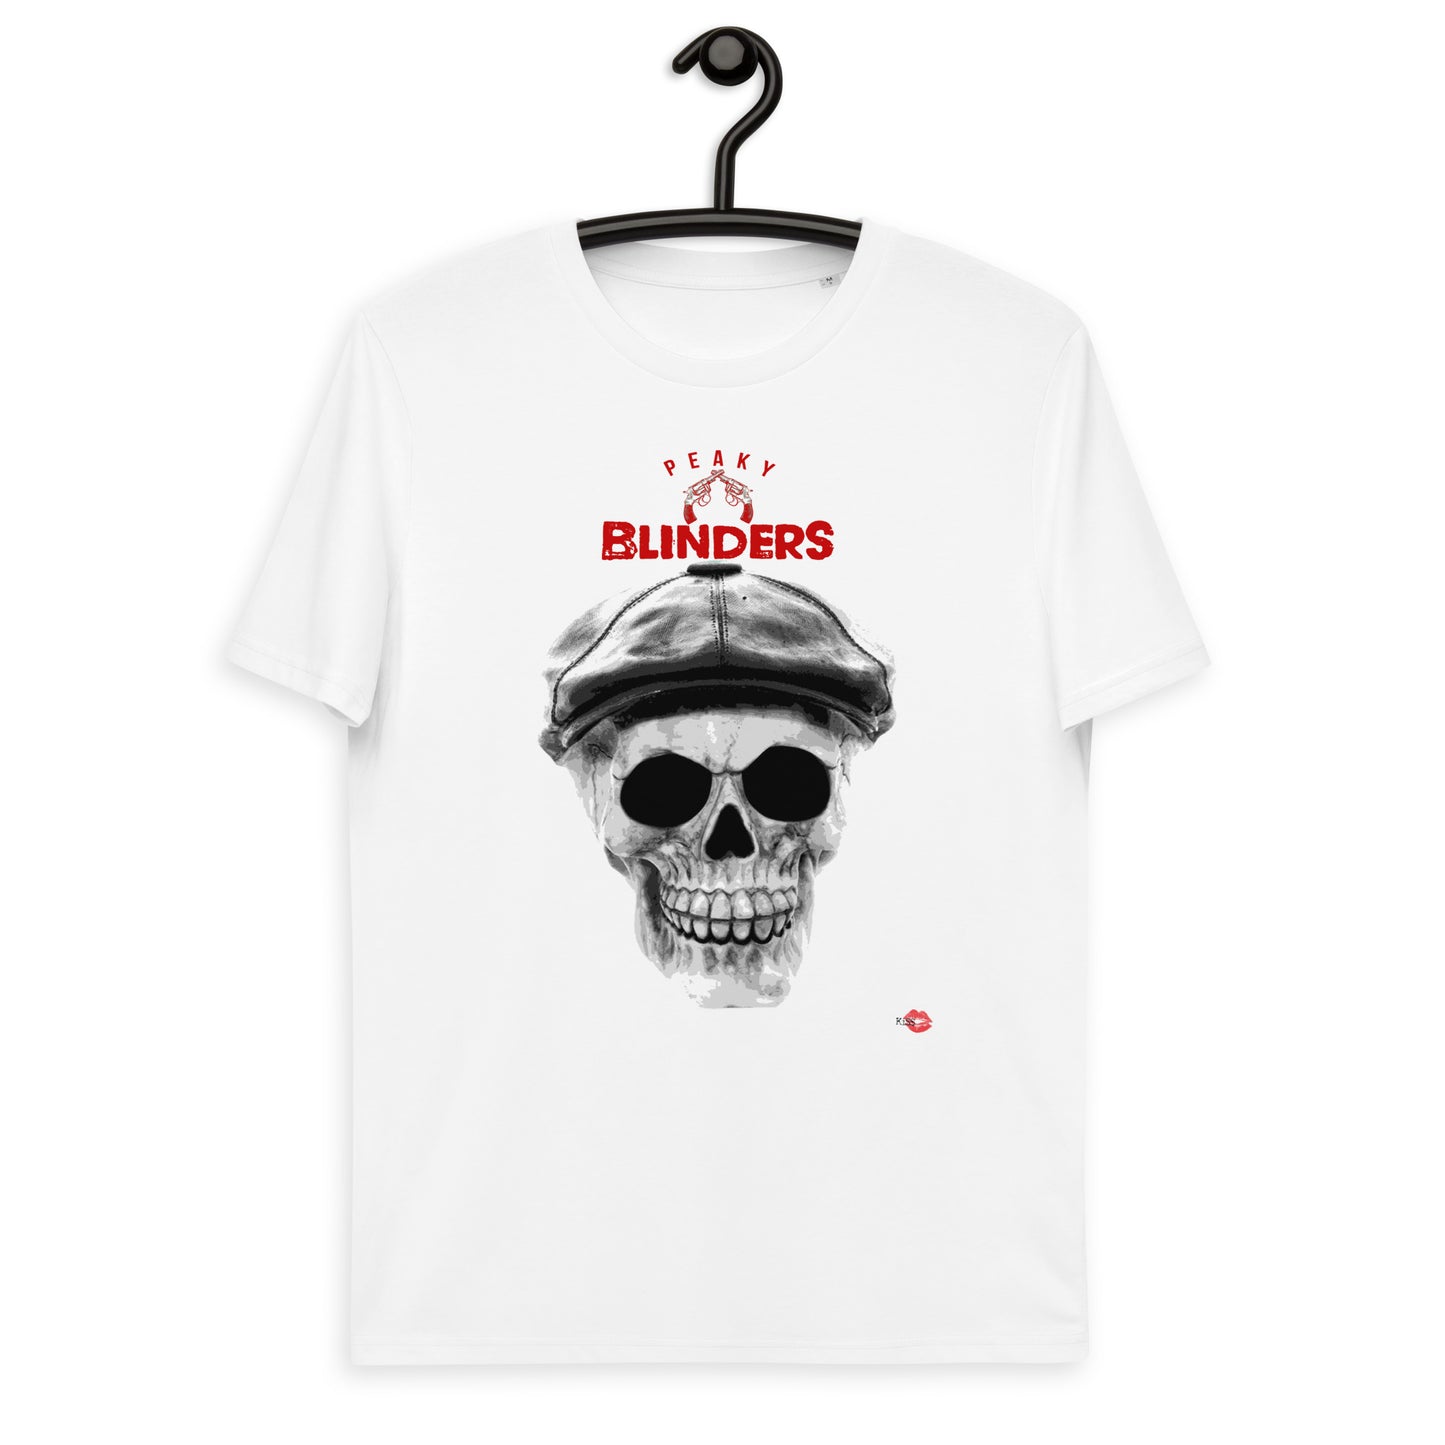 Peaky Blinders Skull KiSS Unisex organic cotton t-shirt - Tommy Shelby inspired tv show